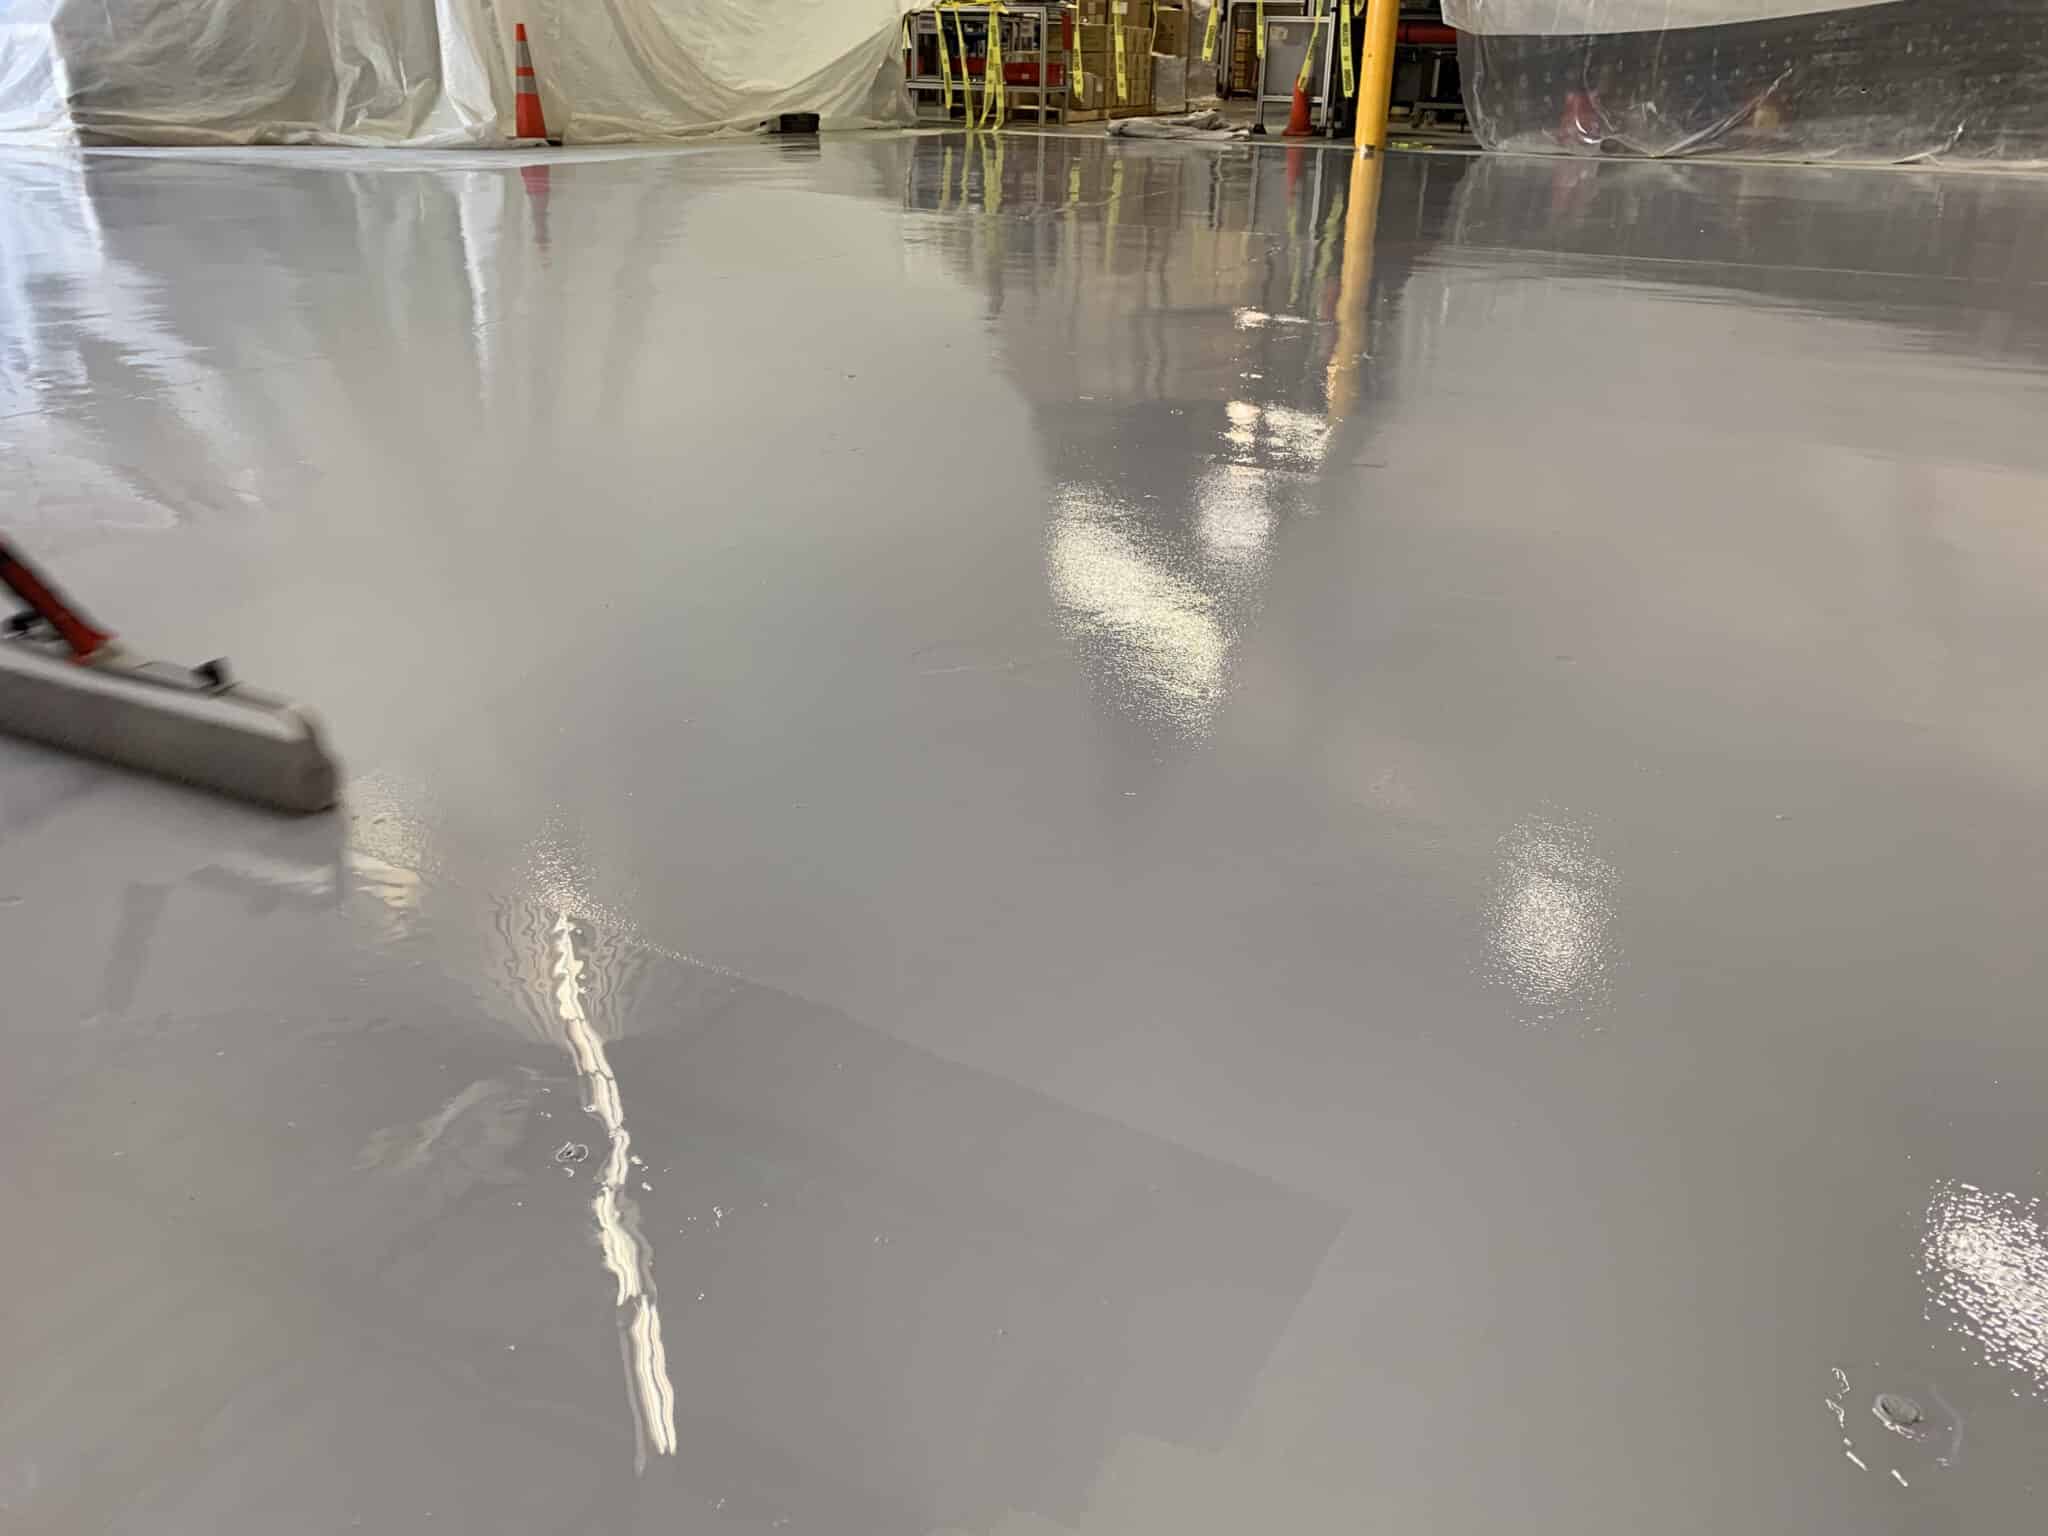 During Epoxy Application